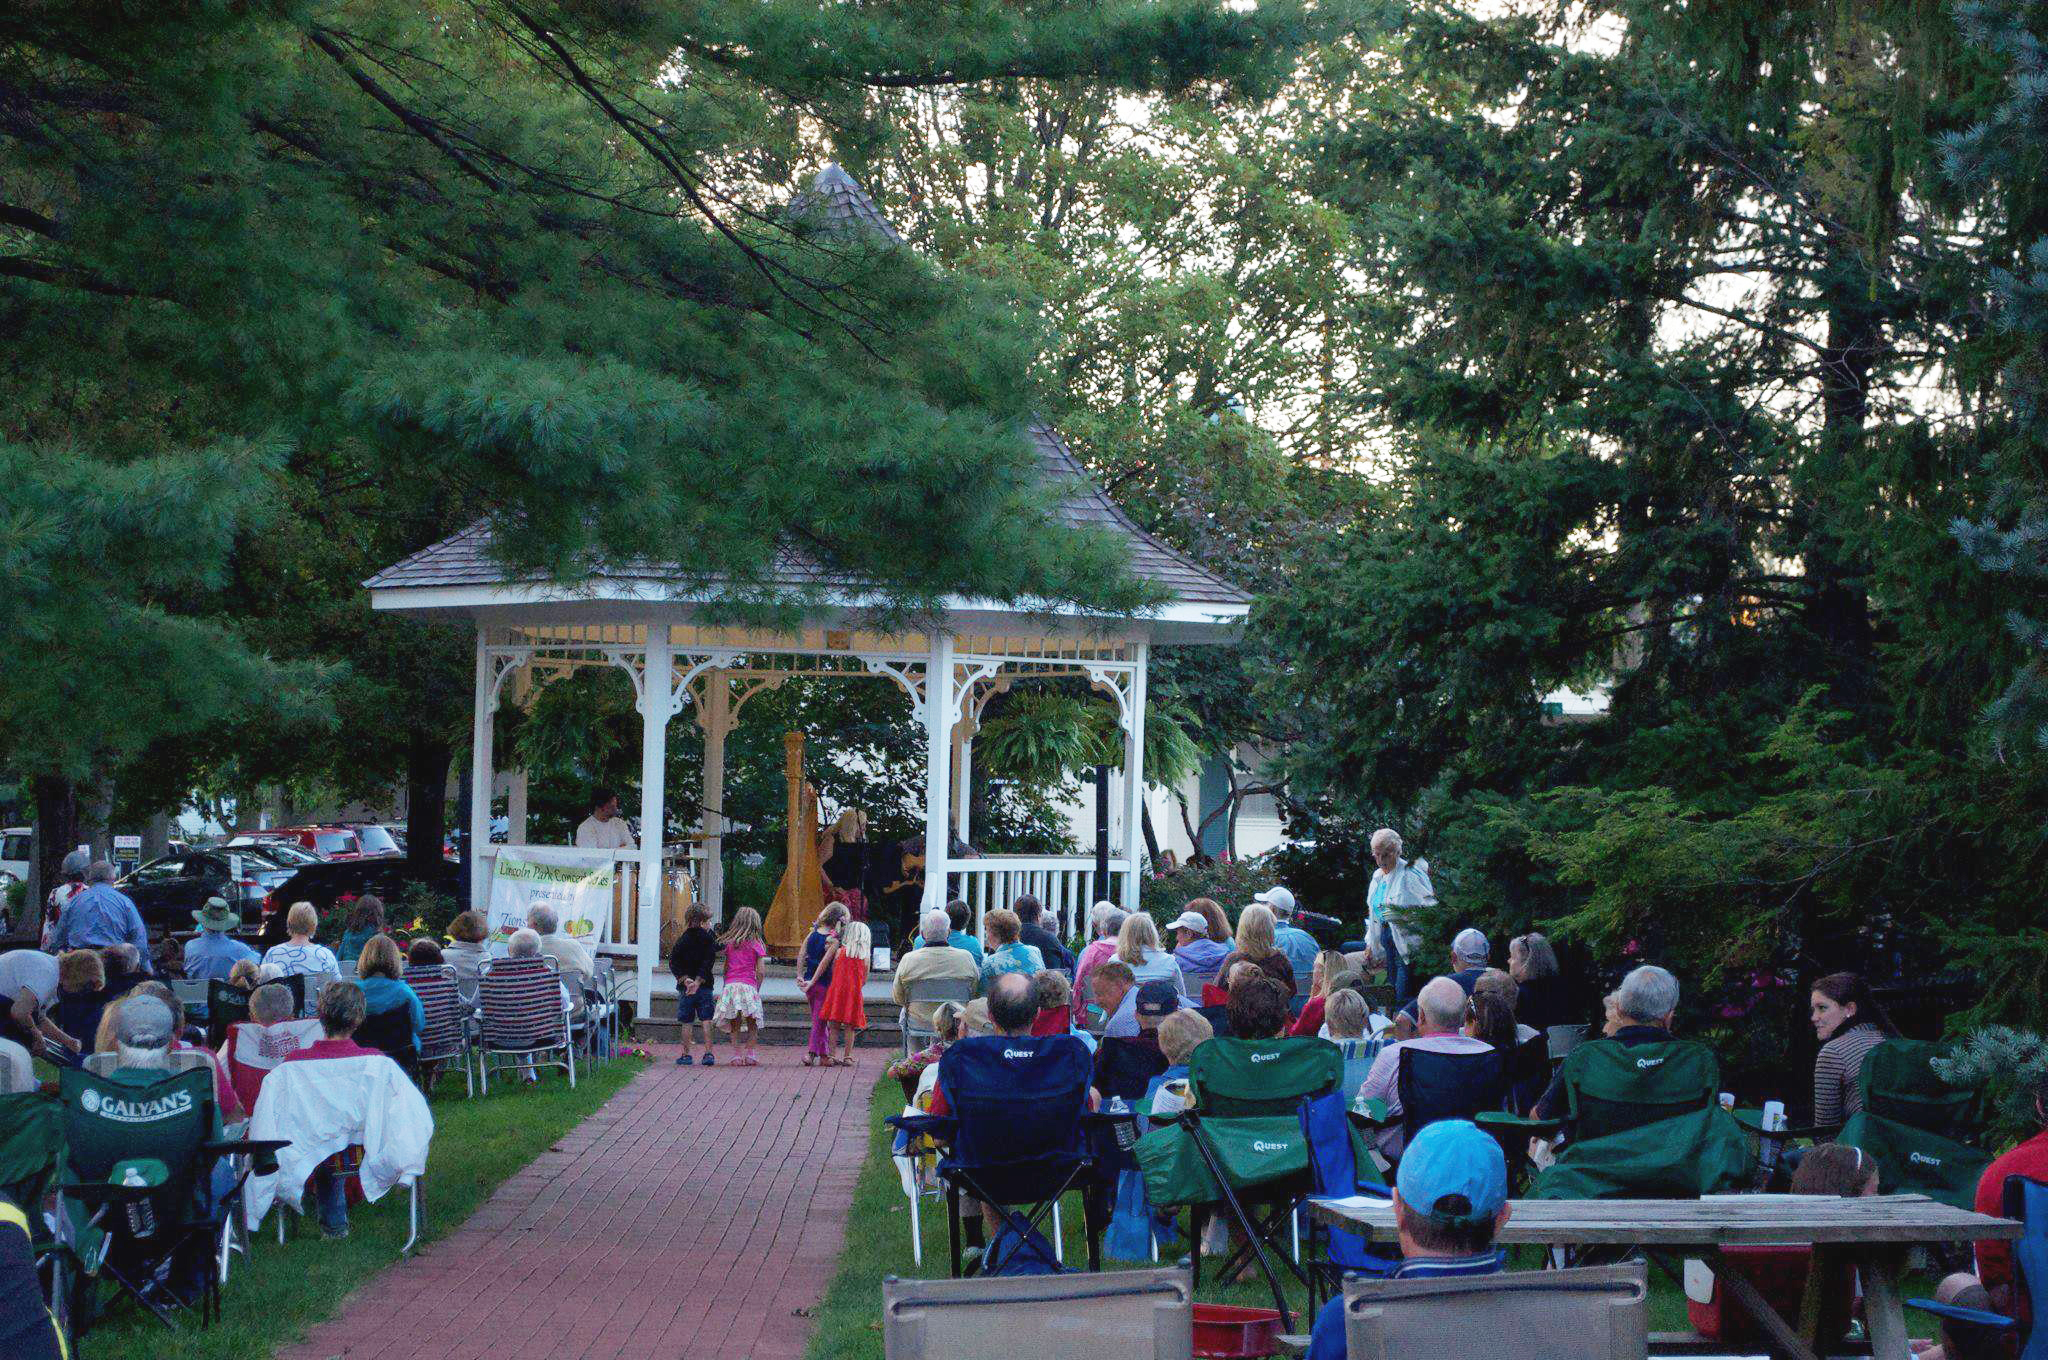 It’s a good idea to bring some lawn chairs for Zionsville’s summer concerts held at Lincoln Park. (Submitted photo)